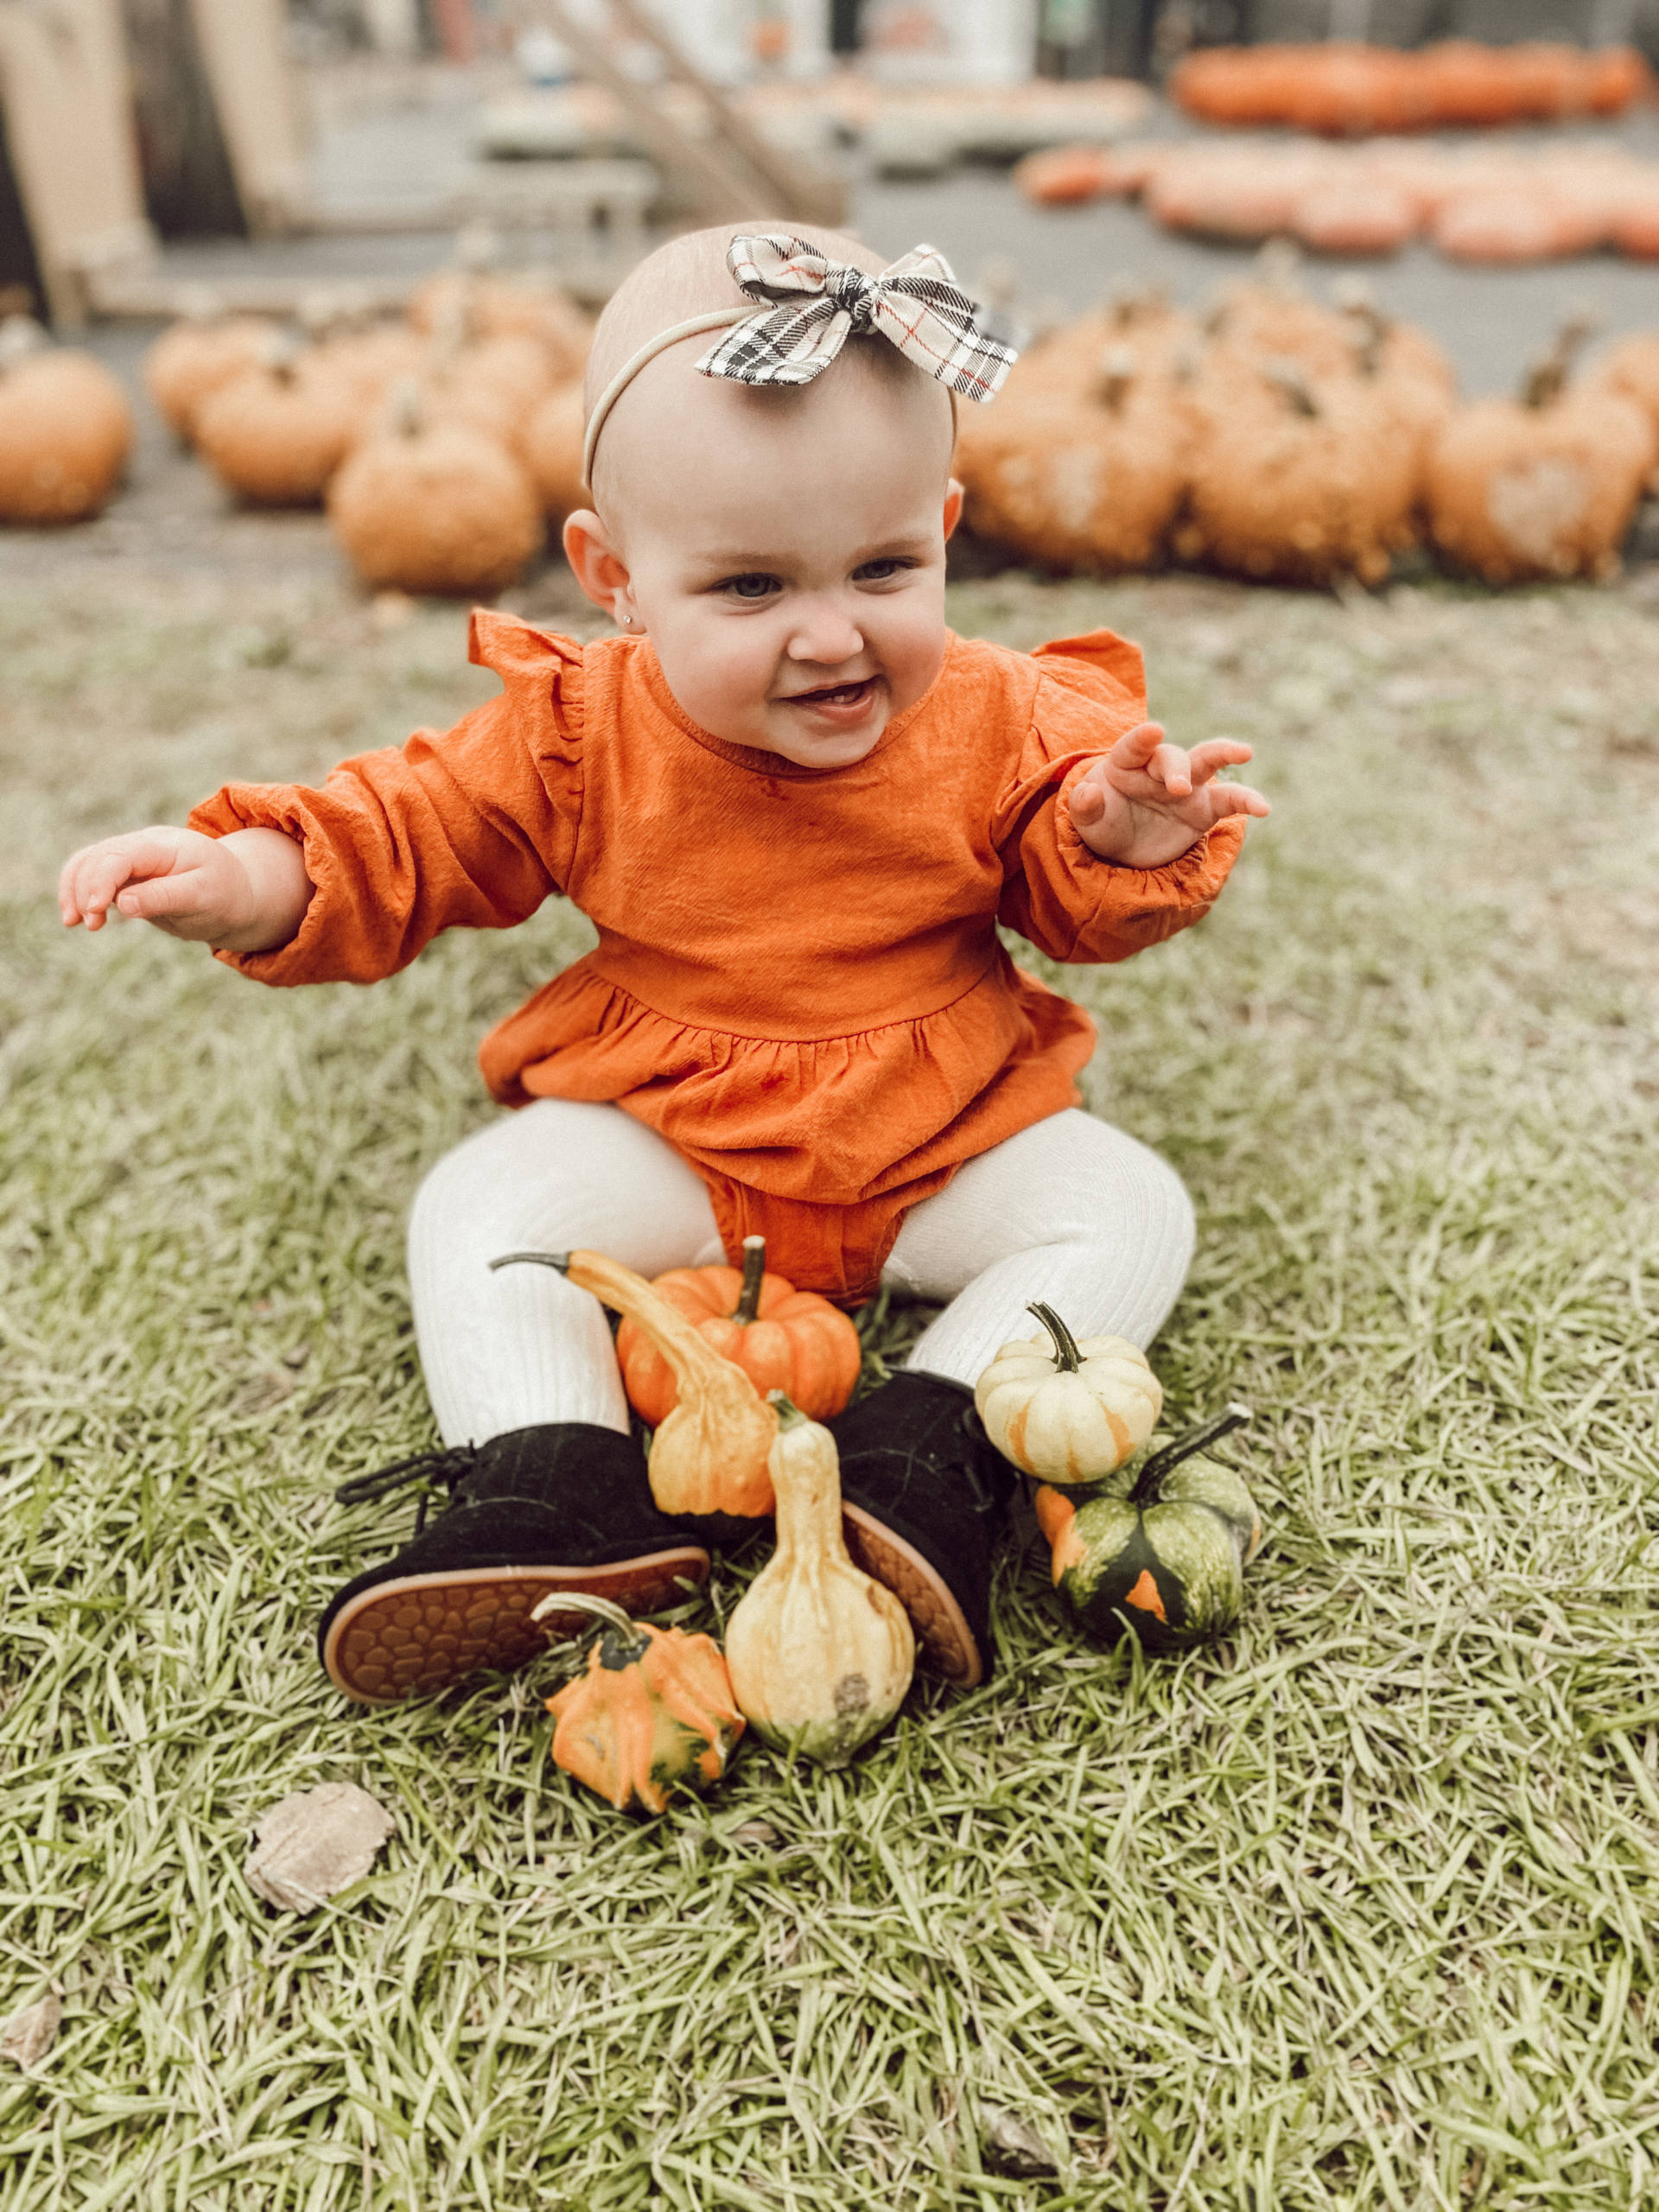 How To Go Apple Or Pumpkin Picking The Right Way | Fall Activities For ...